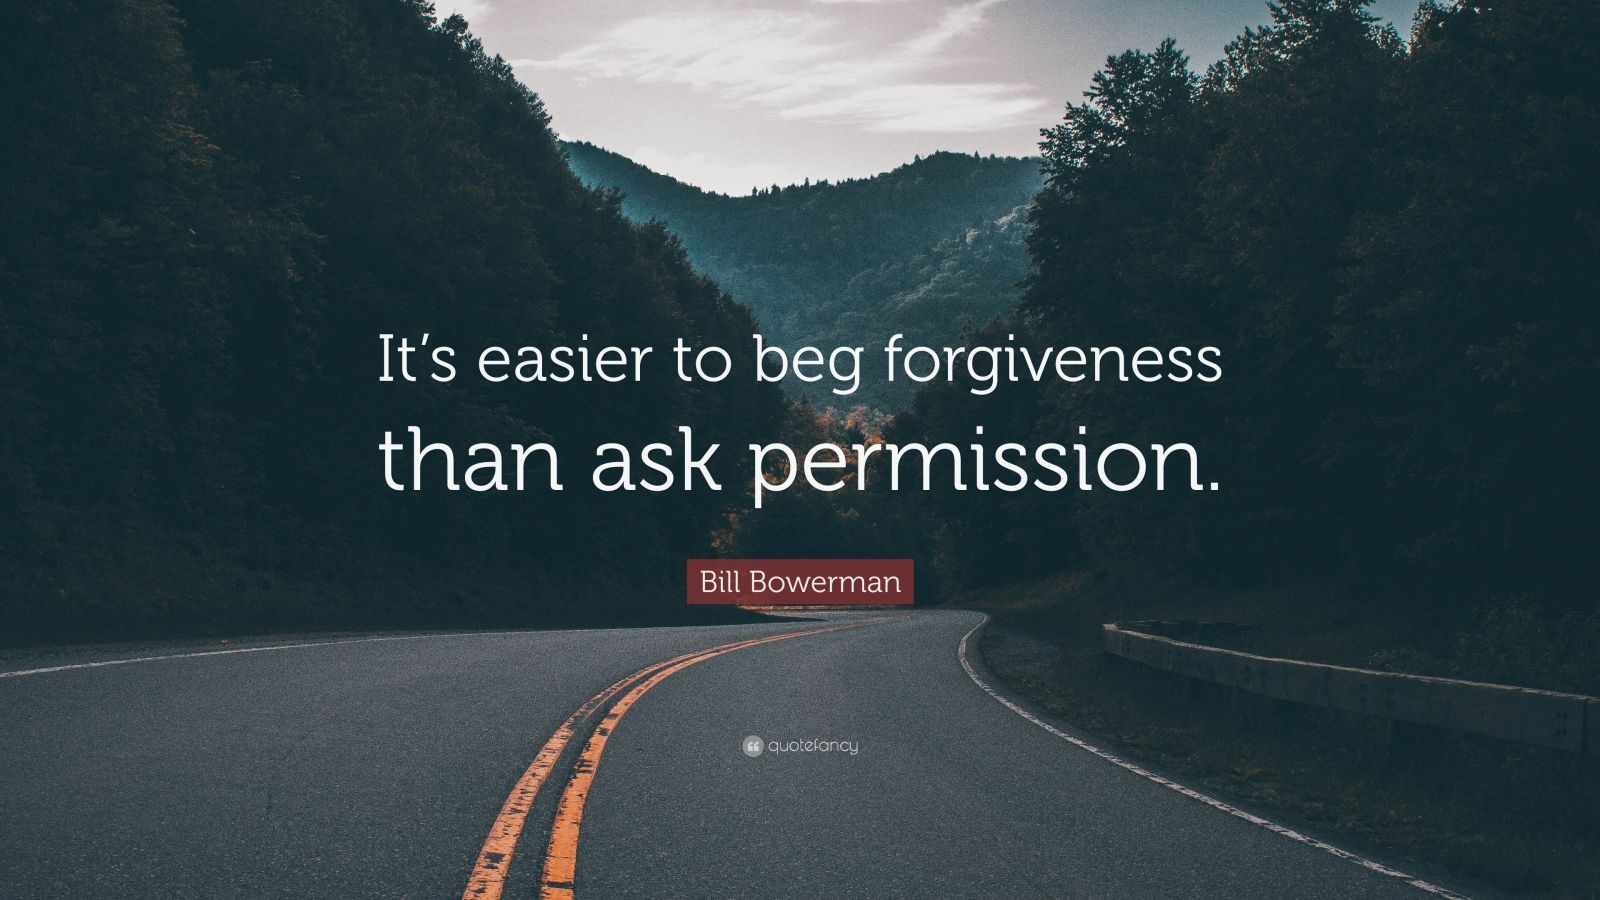 Bill Bowerman Quote “it’s Easier To Beg Forgiveness Than Ask Permission ”